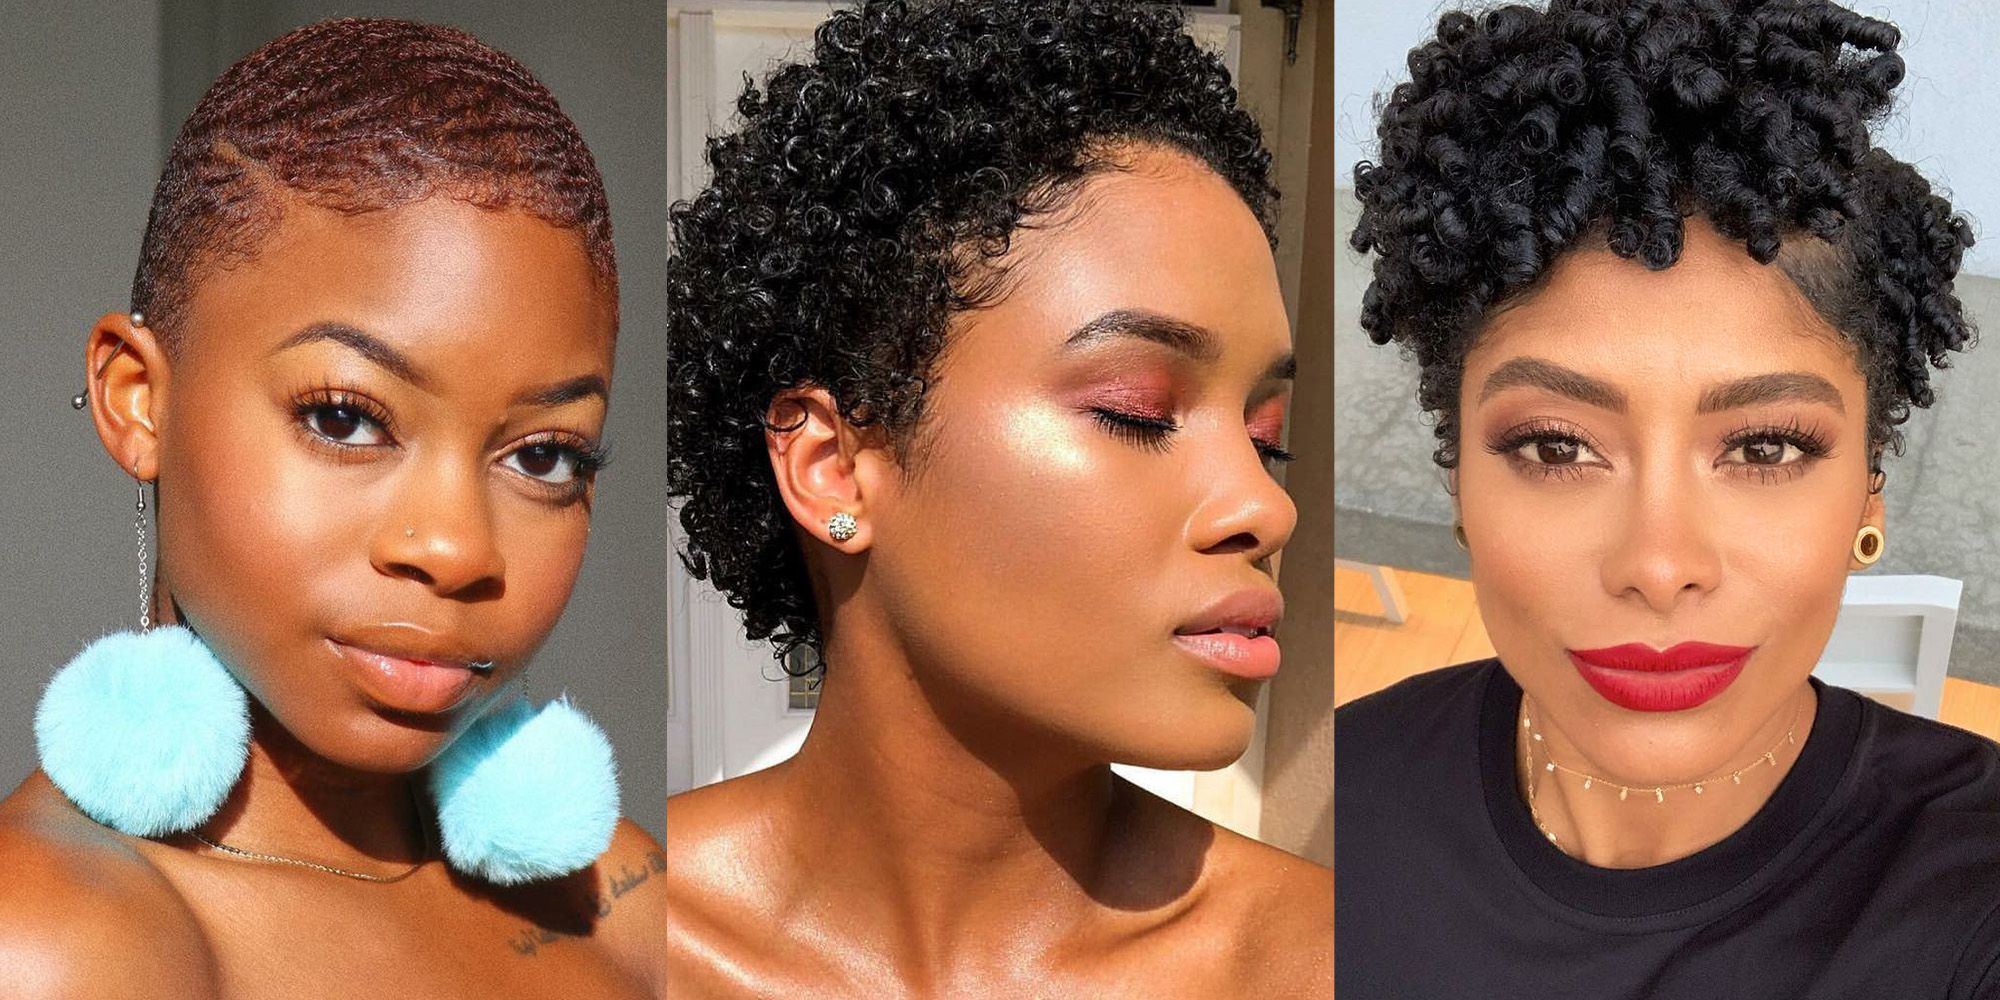 Most Current Double Twist And Curls To One Side Prom Hairstyles With 14 Short Natural Hairstyles – The Best Hairstyles For Short Natural Hair (View 20 of 20)